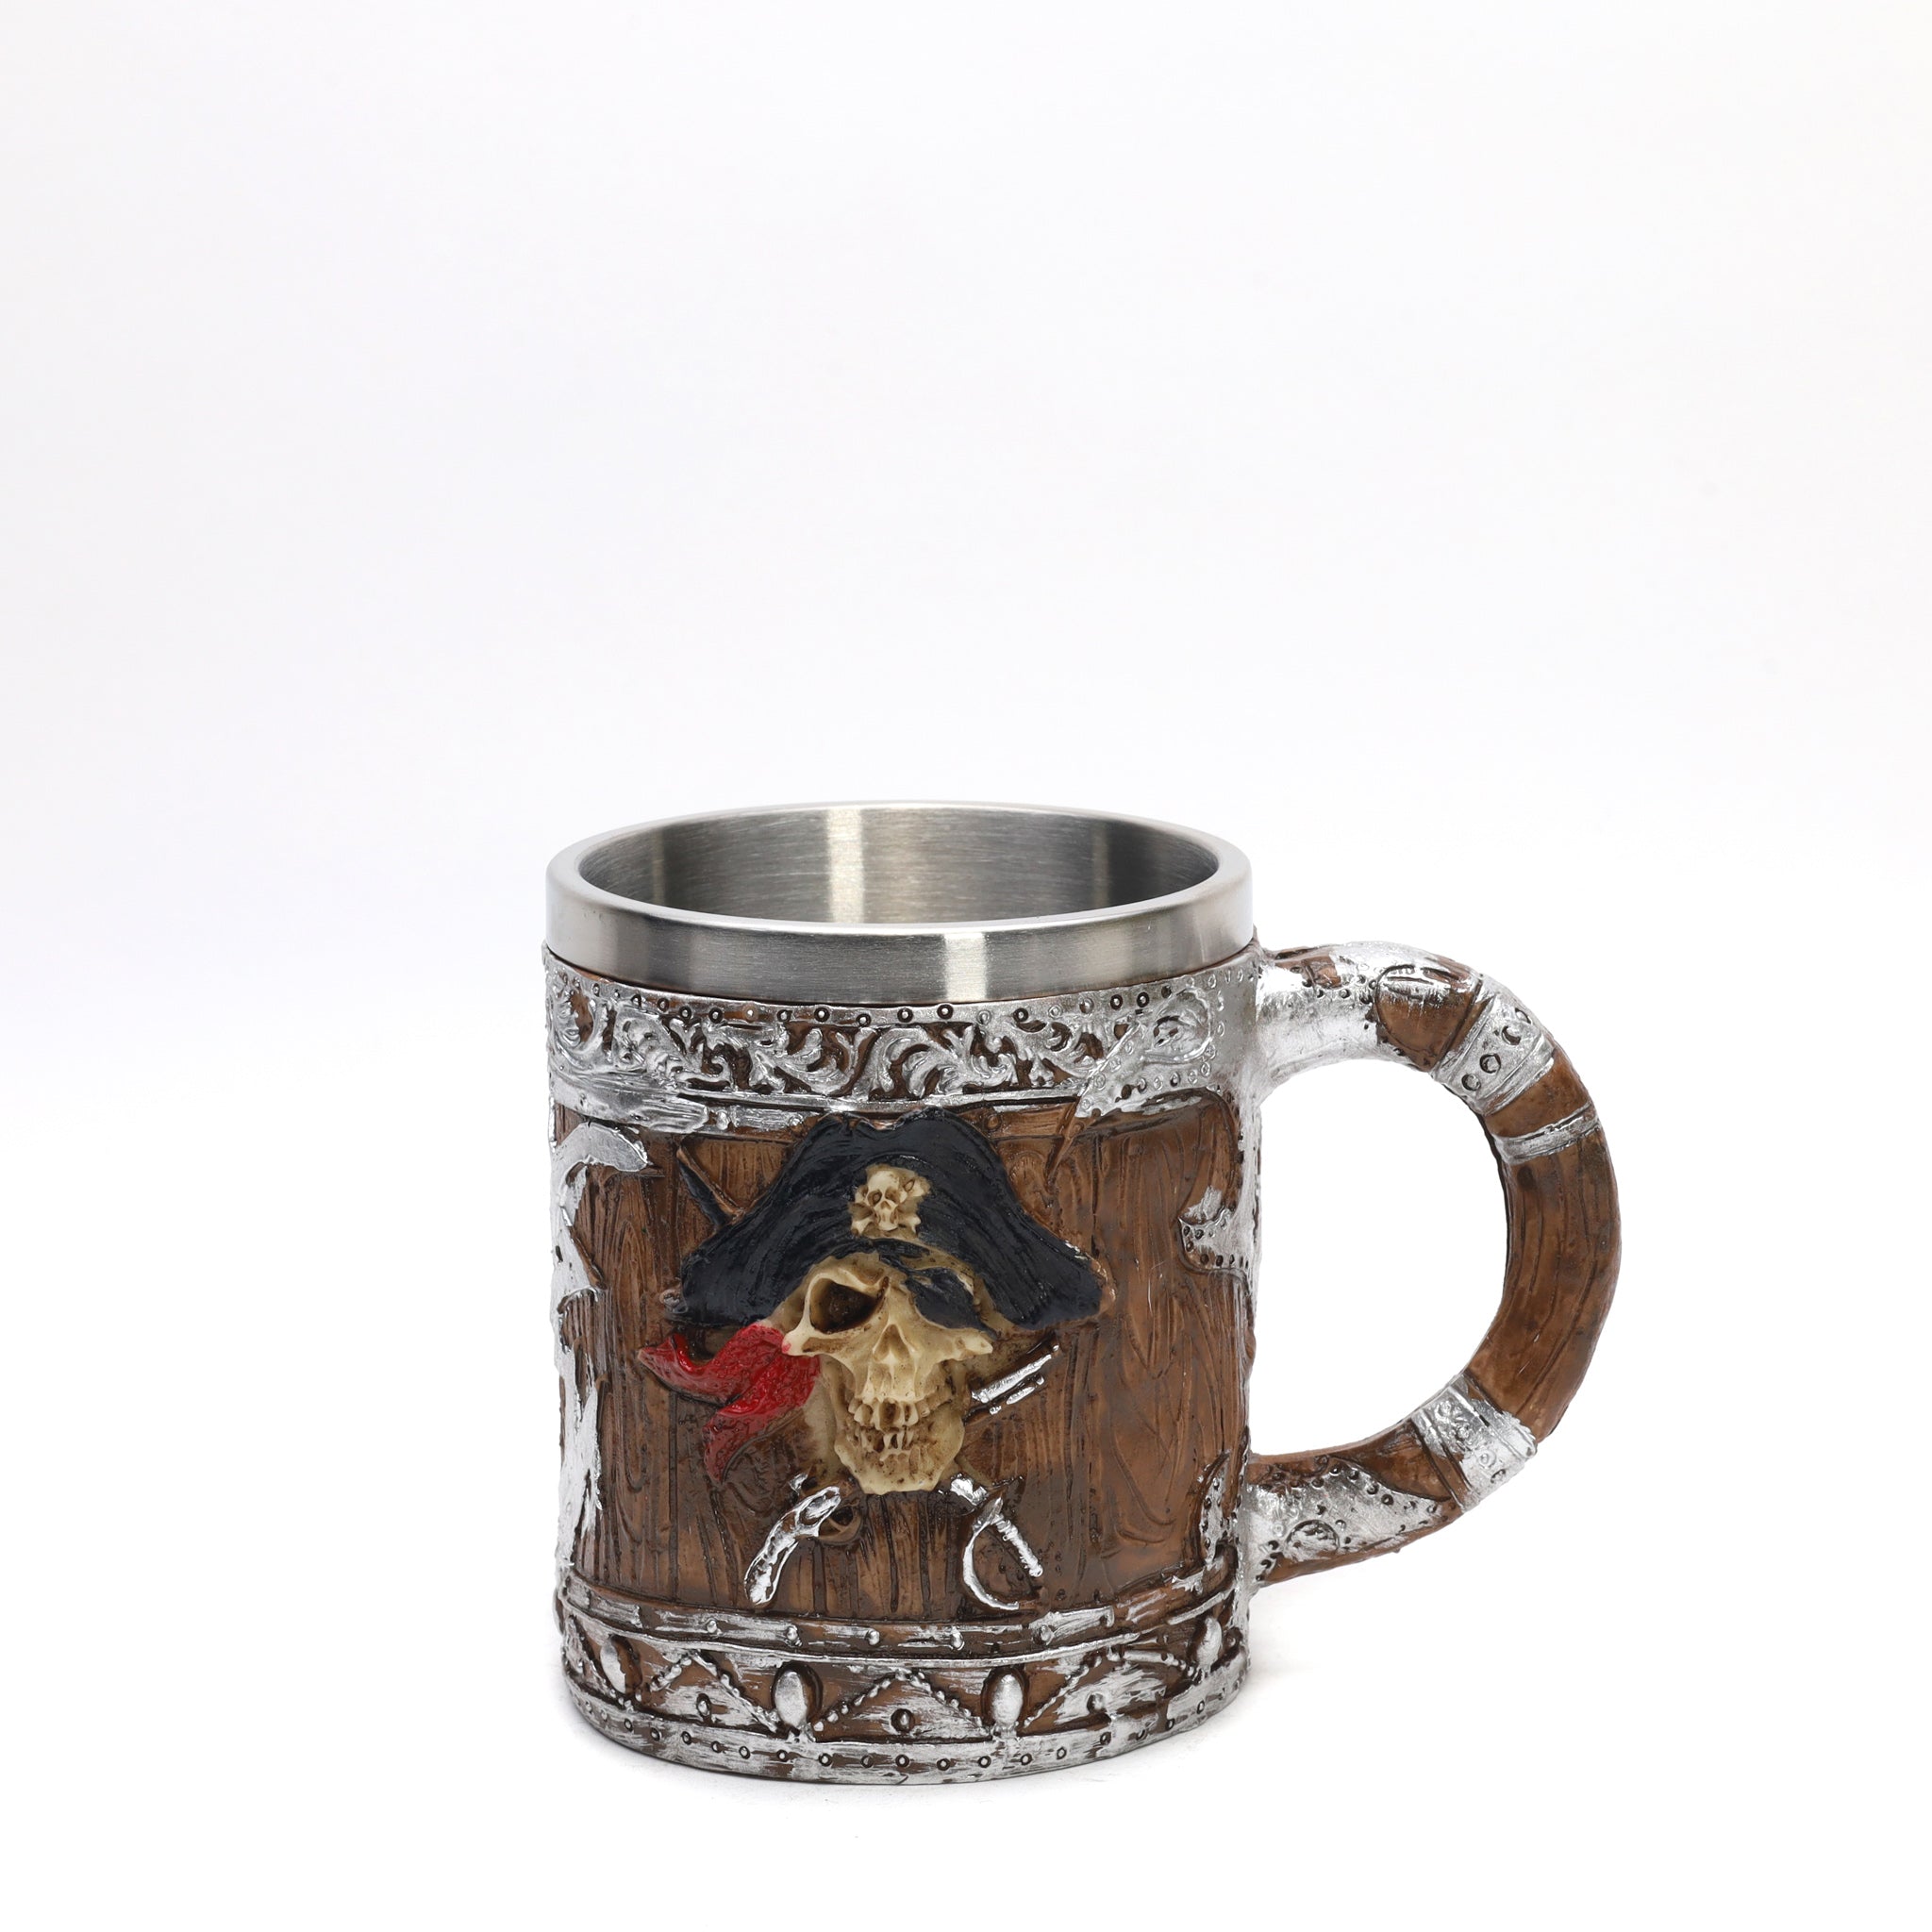 Pirates of the Caribbean Bandana Skull With Cross Swords Tankard Coffee Beer Mug Cup QuirkyStore.in